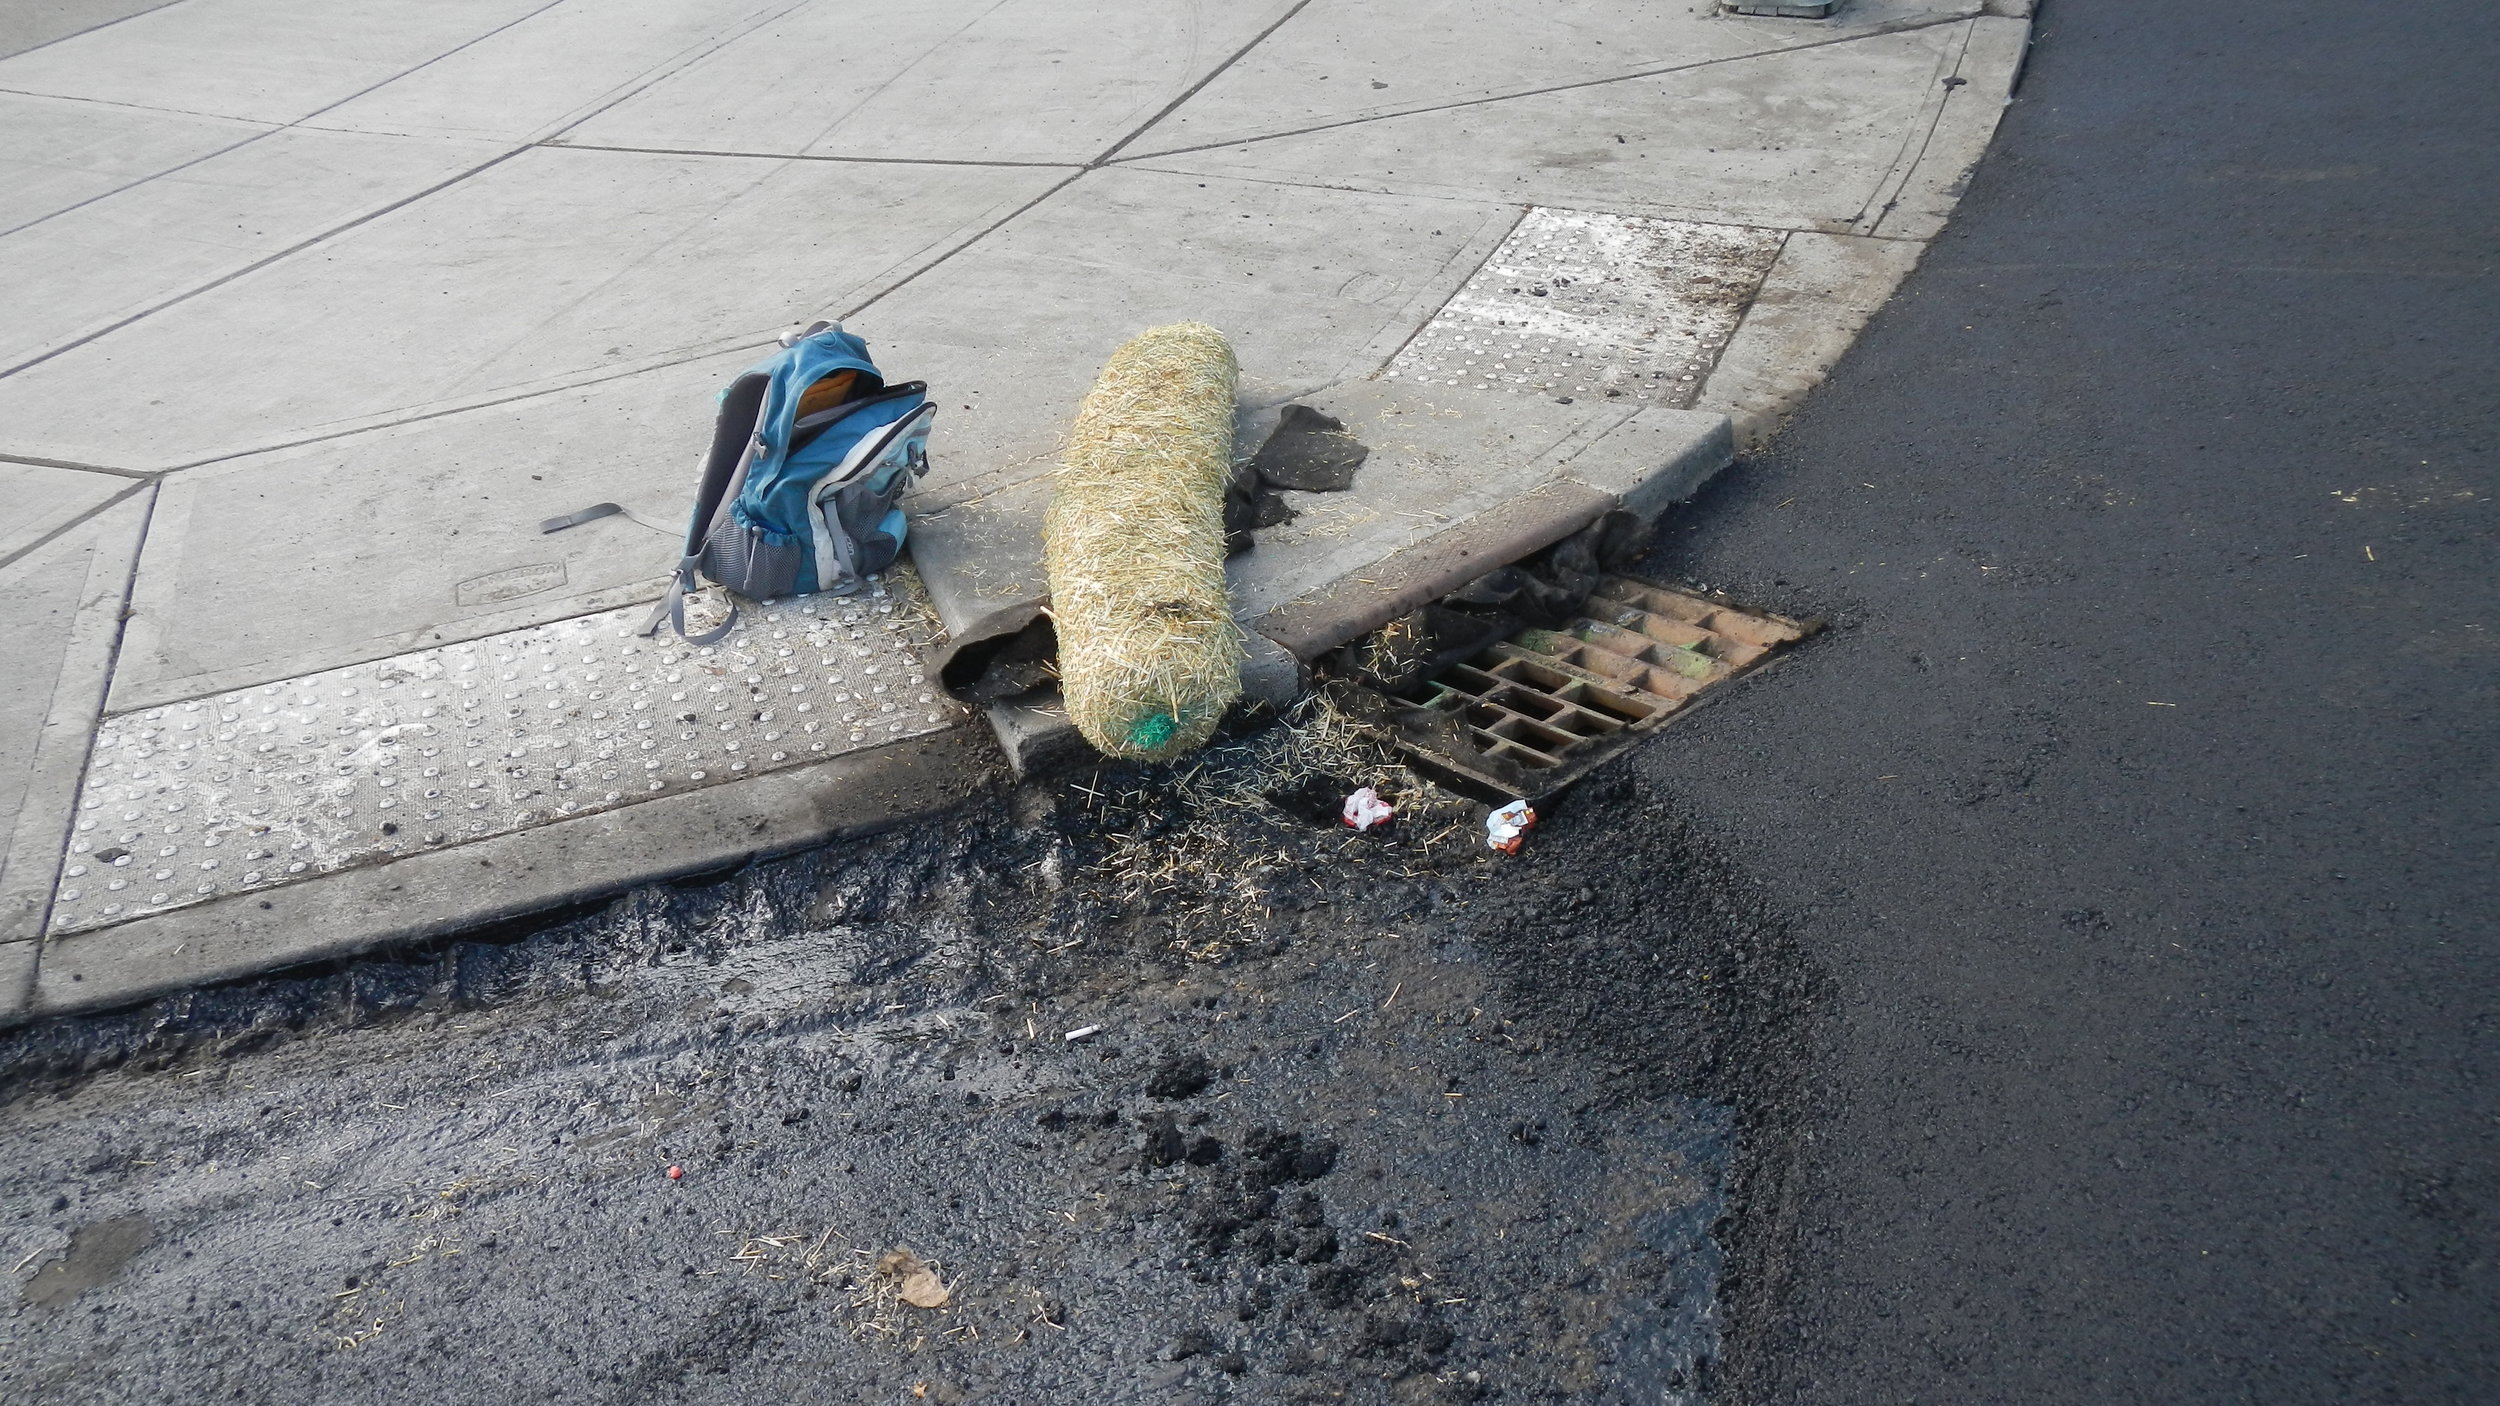 Excessively dirty water and debris plugging the stormwater drain